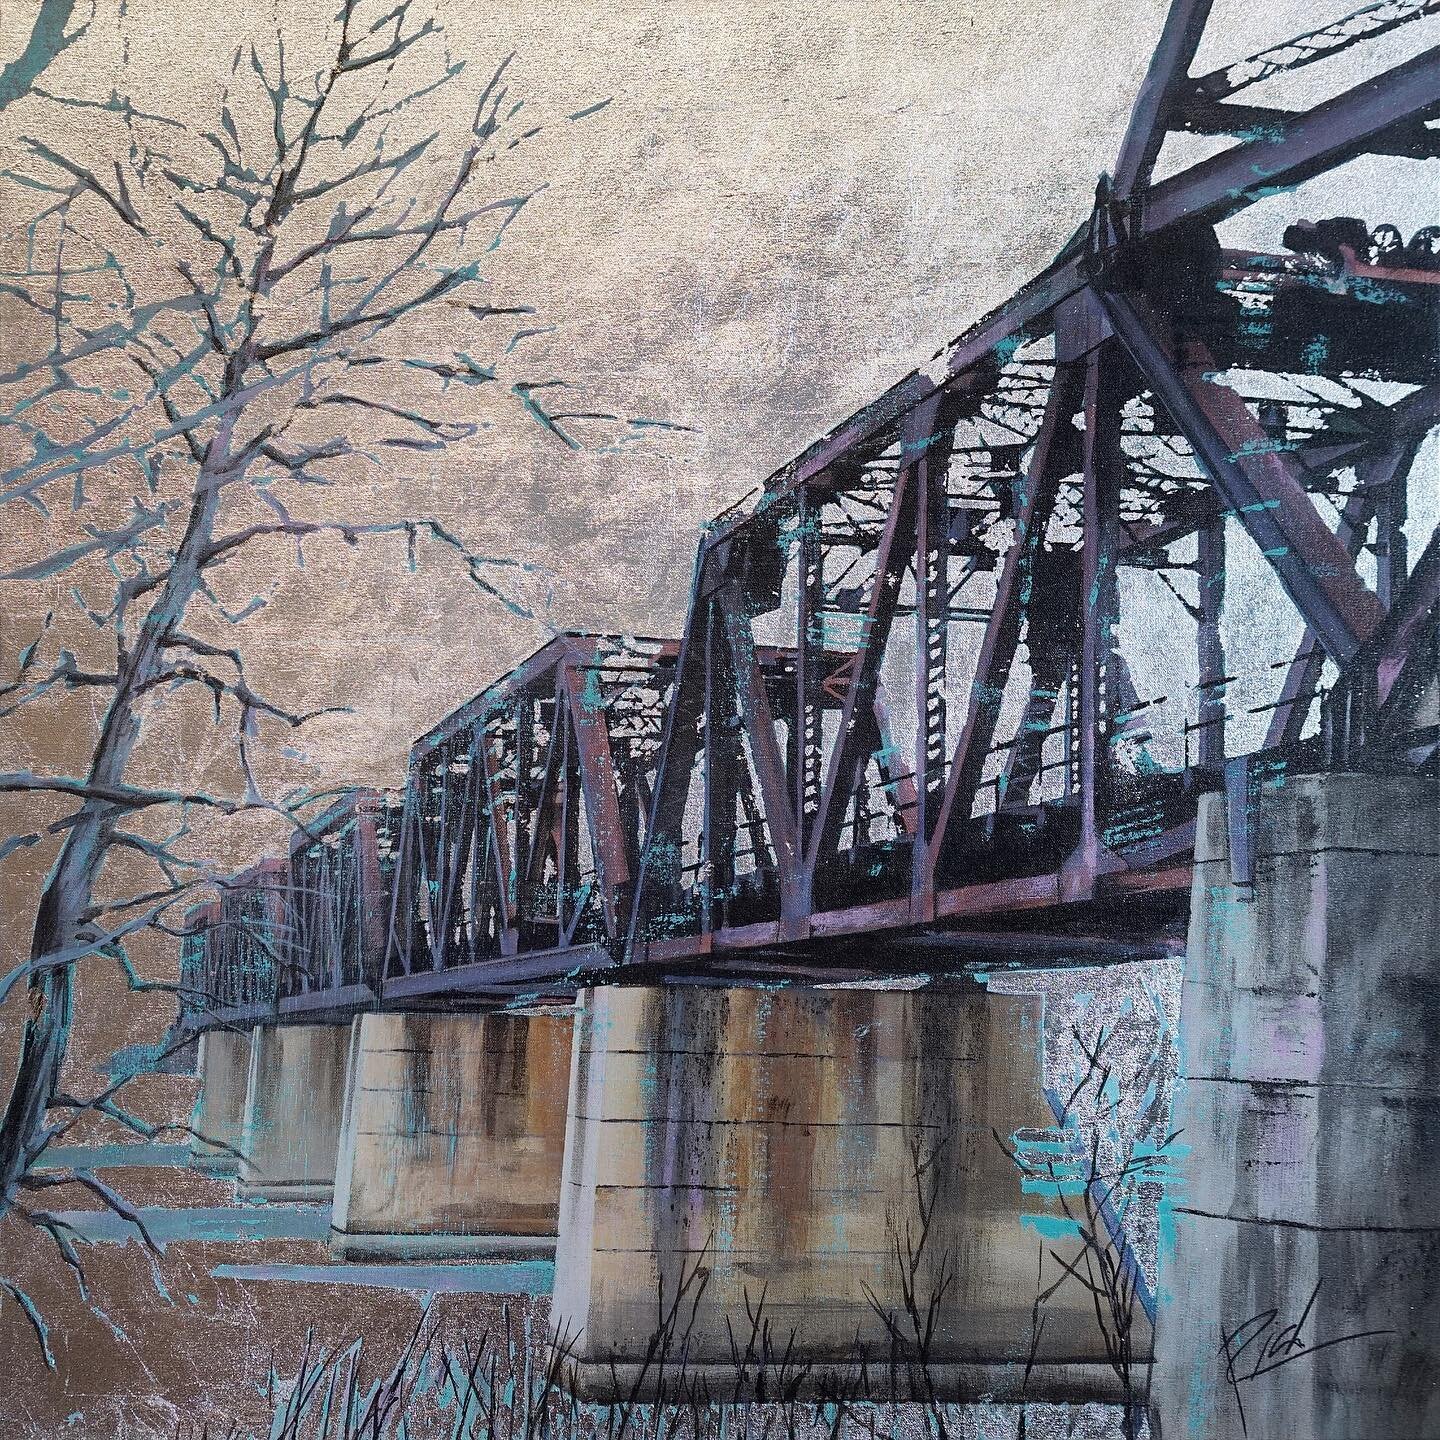 Rail over the red pt2 variation acrylic and silver leaf on canvas 30x30

#contemporarypainting #contemporarypainter #silverleaf #railbridge #trainbridge #ironbridge #bridgepainting #cityscapepainting #winnipegbridge #artoncanvas #canadianpainter #can